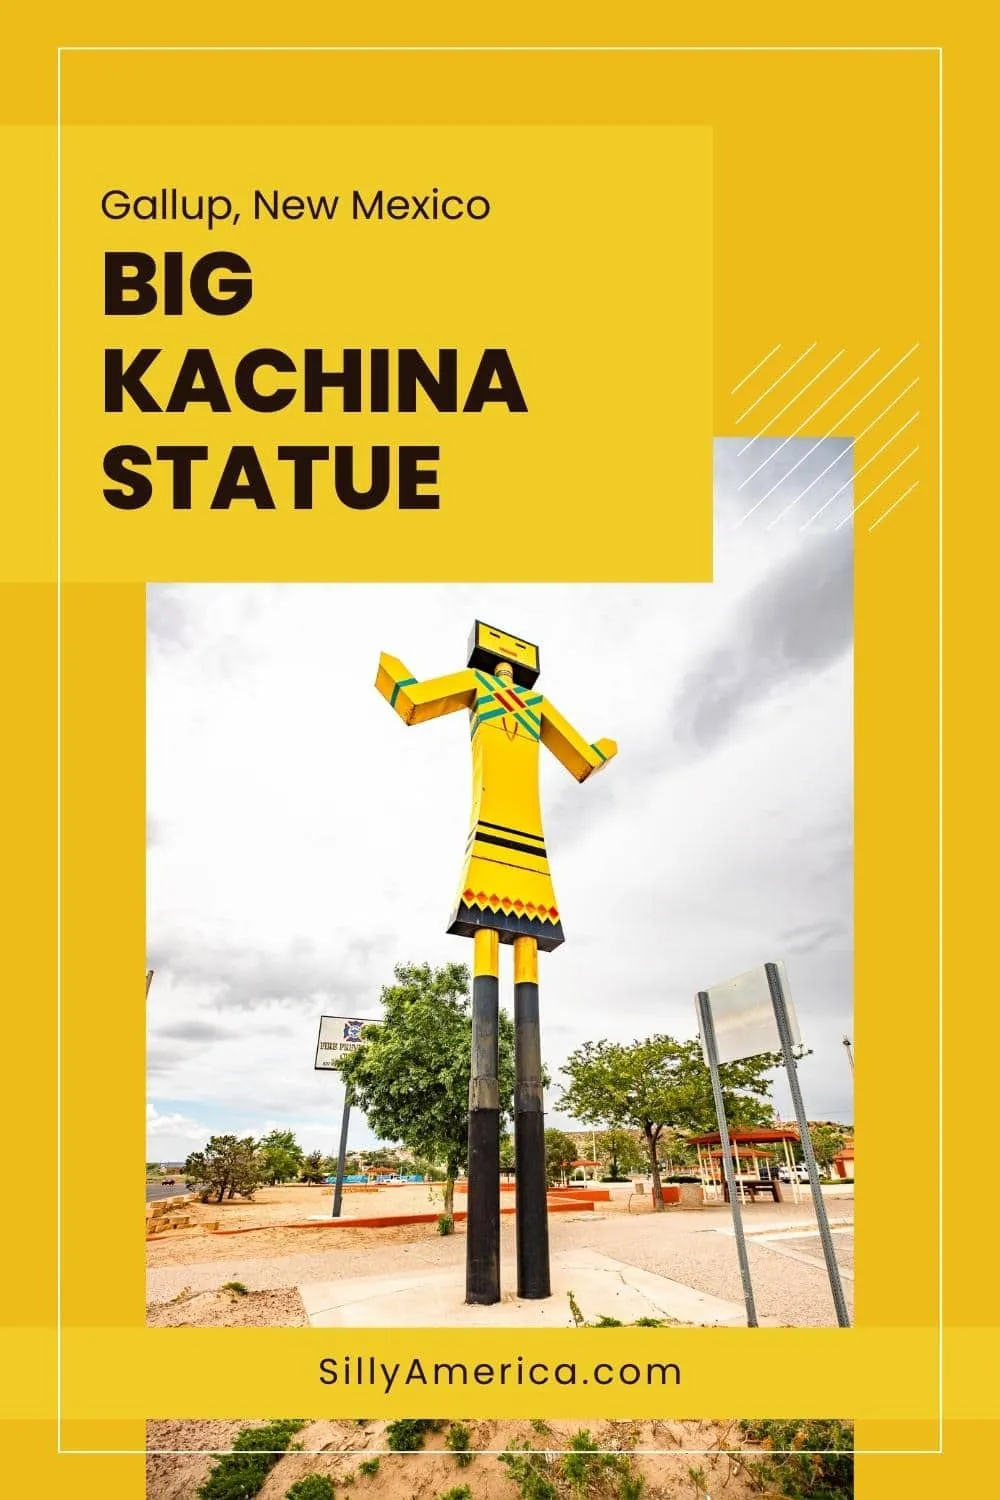 Greetings from Gallup, New Mexico, where you'll find this Big Kachina Statue welcoming you to town. Since the 1950s there's been at least one Big Kachina Statue in Gallup, New Mexico. Visit this roadside attraction on a Route 66 road trip through New Mexico. Add it to your travel itinerary! #Route66 #Route66Attraction #NewMexico #NewMexicoRoadTrip #RoadTrip #Route66Roadtrip #RoadsideAttraction #RoadsideAttractions